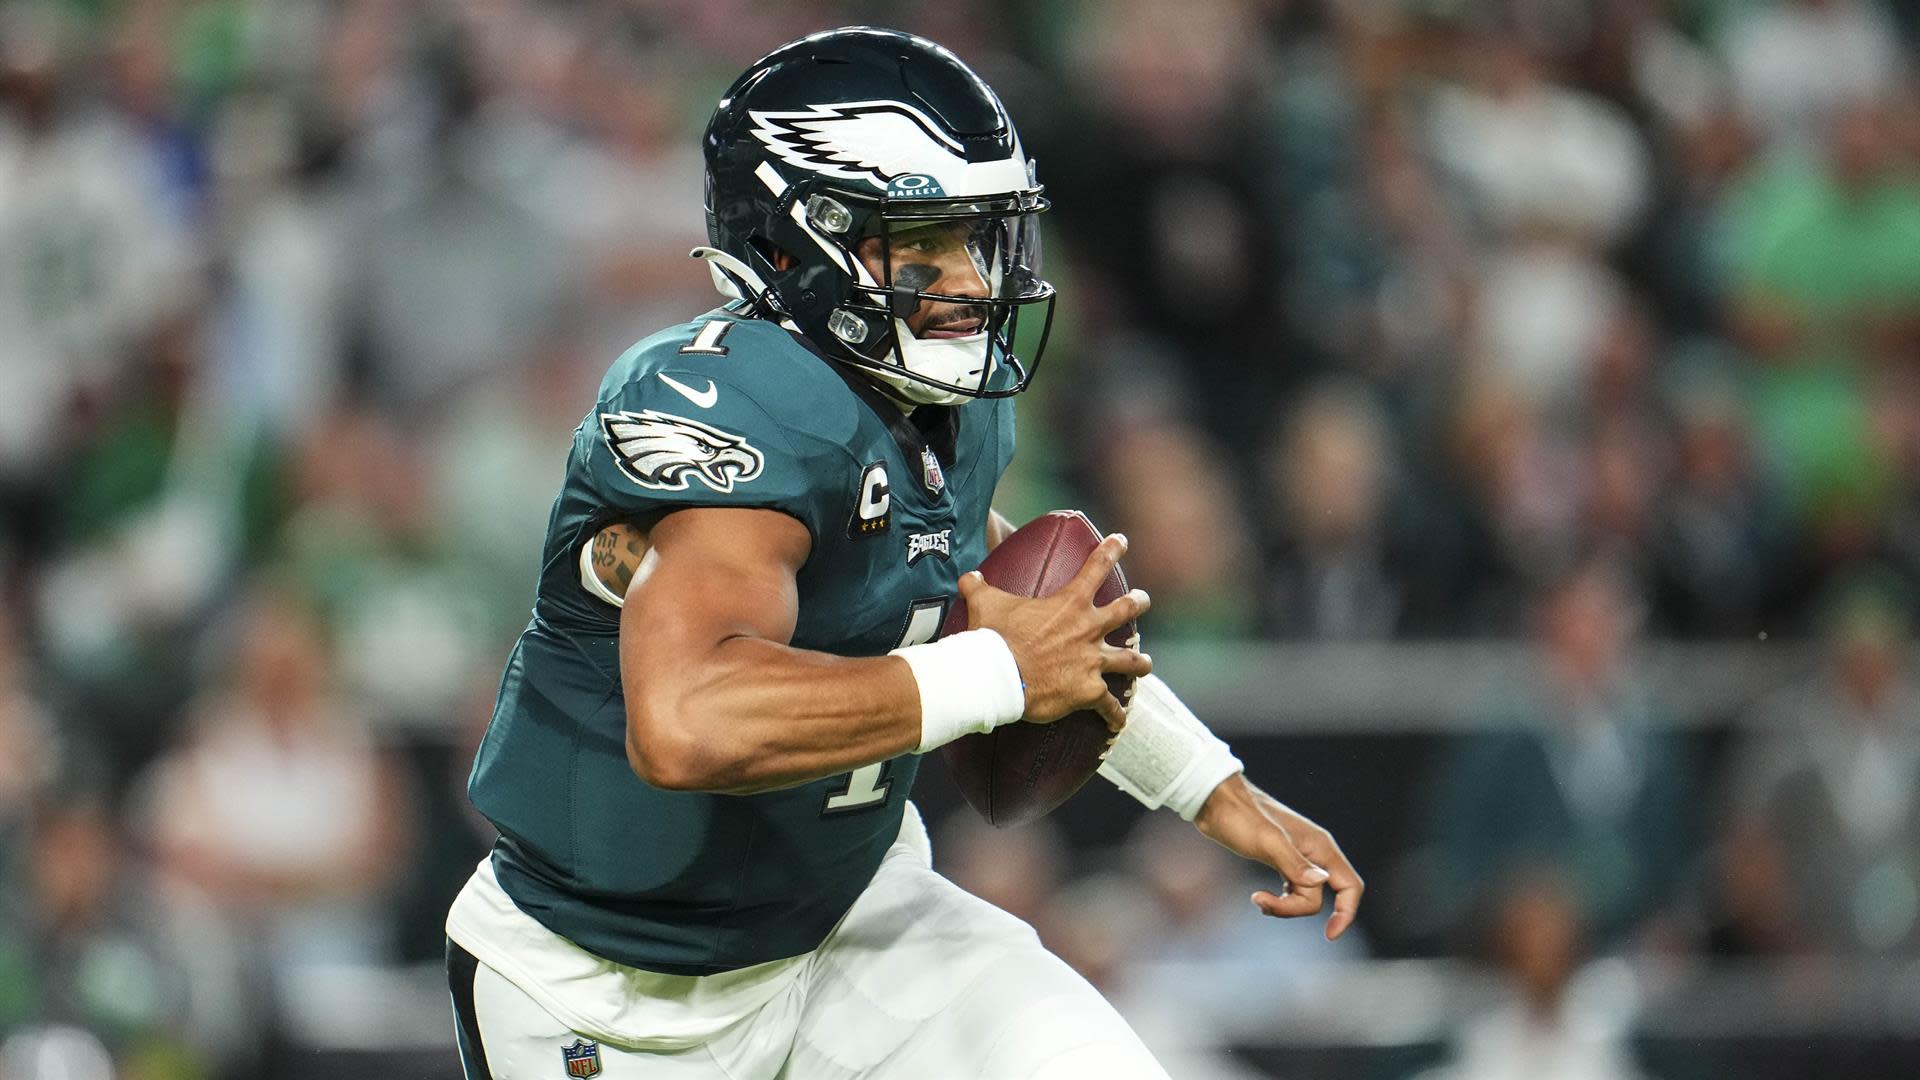 Eagles' Justin Evans questionable to return with injury vs Buccaneers